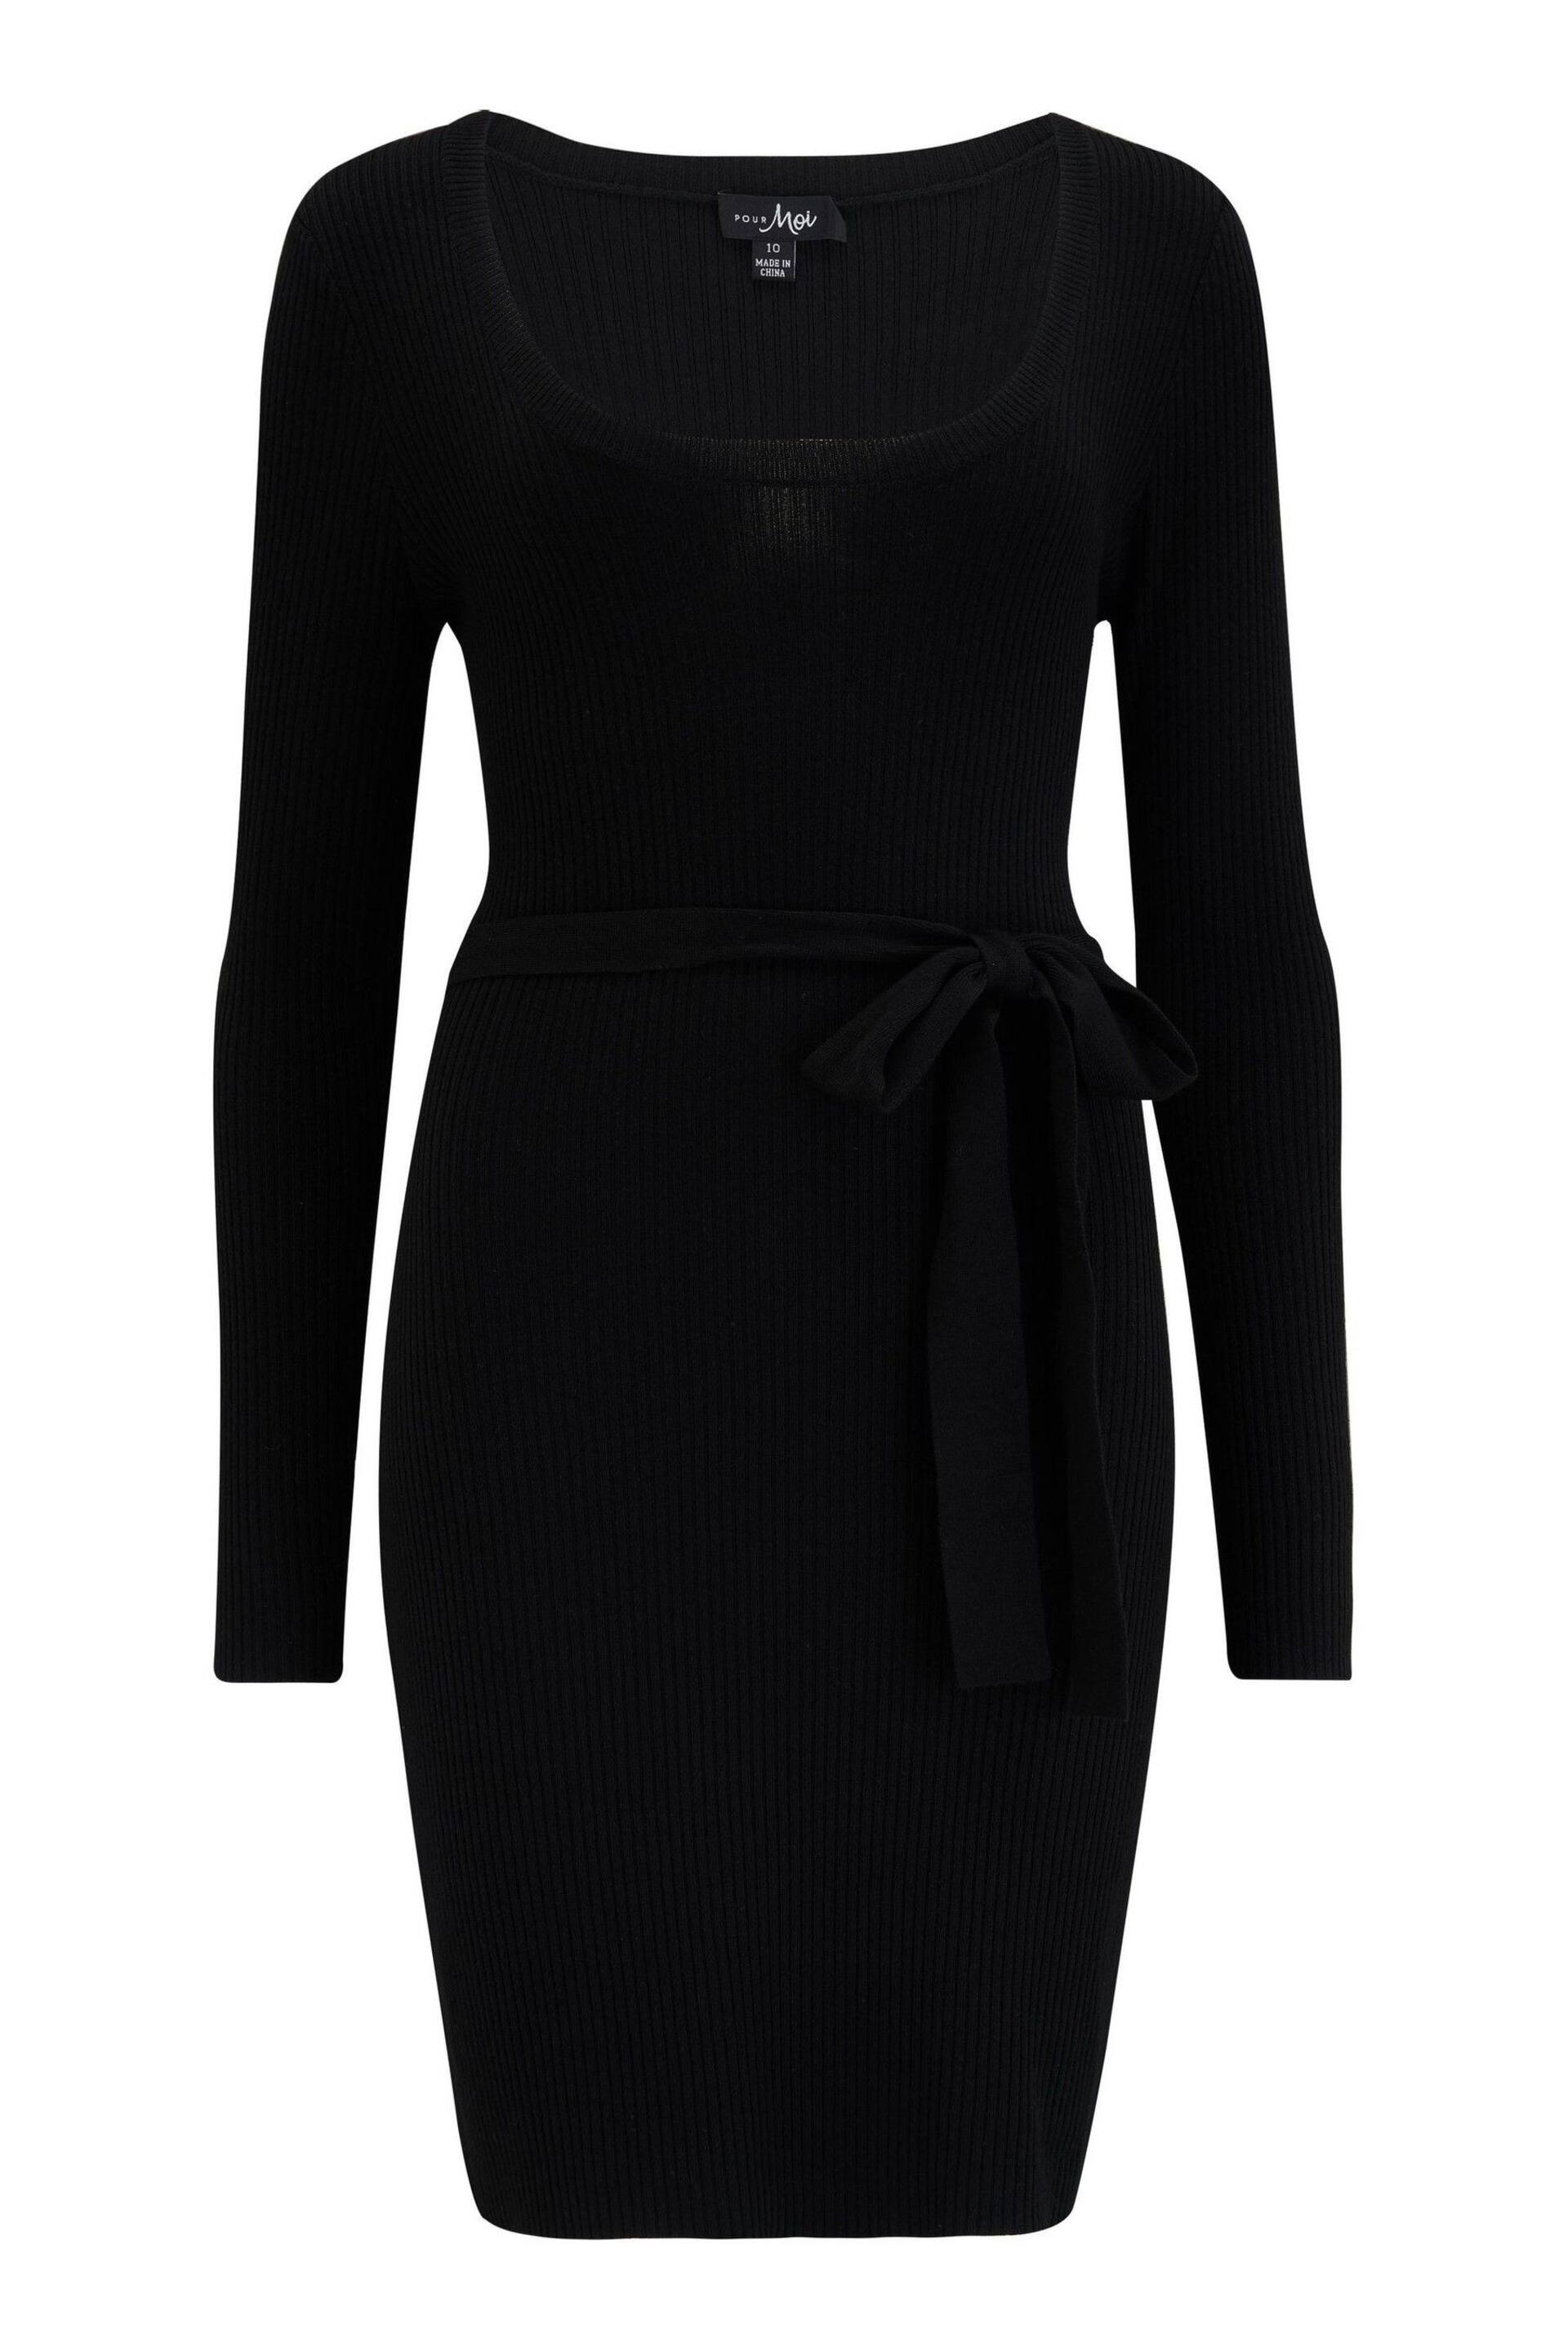 Pour Moi Black Edie Scoop Neck Rib Knit Dress with LENZING™ ECOVERO™ - Image 3 of 4